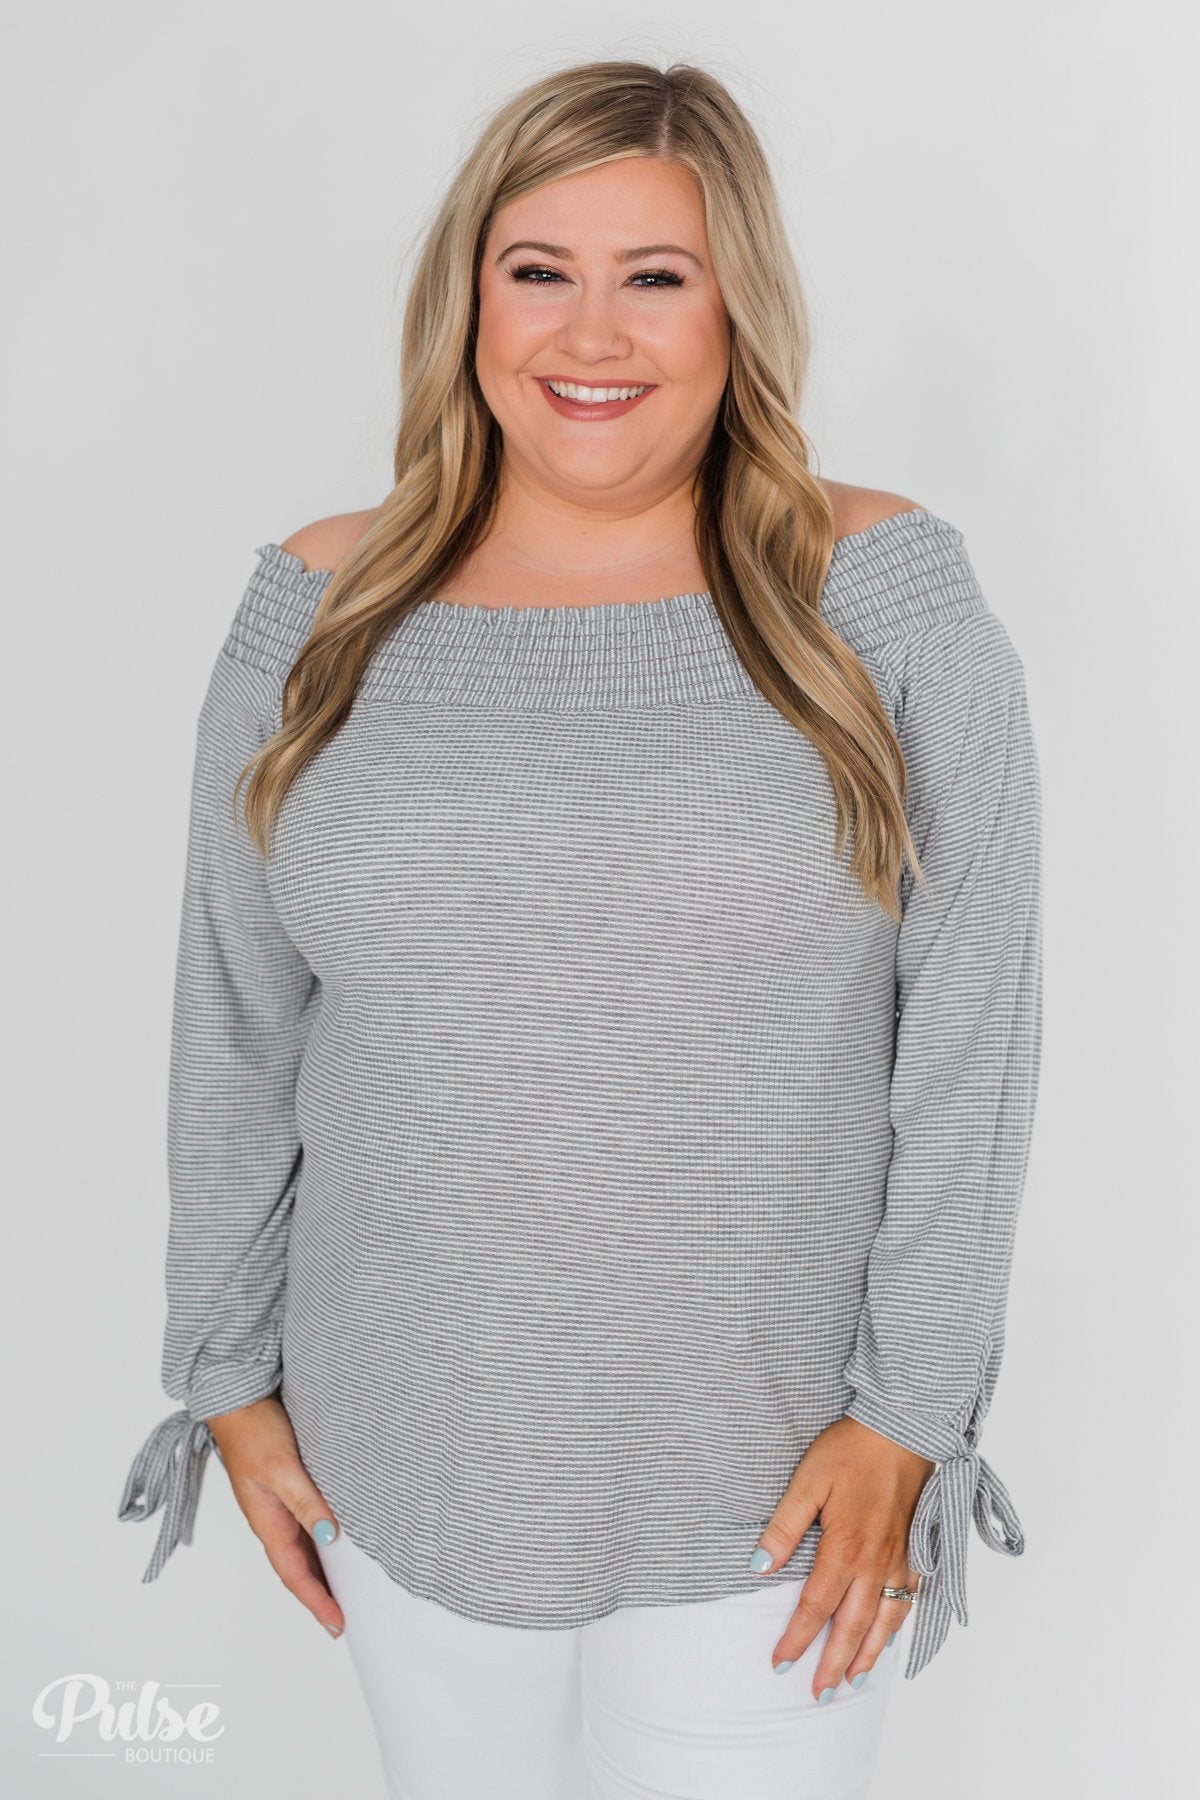 Dreaming of Stripes Off the Shoulder Top - Grey & White